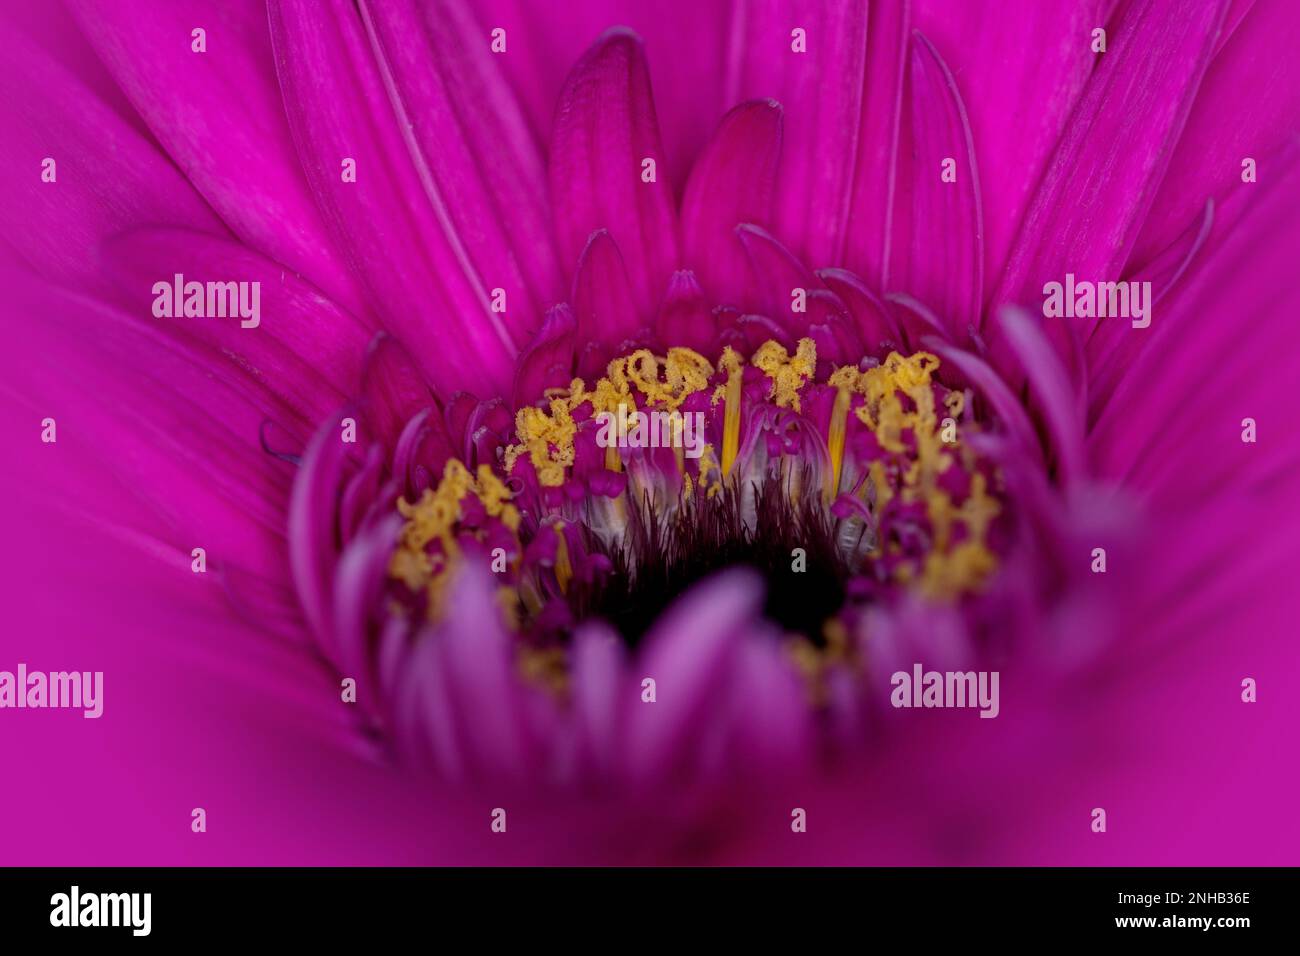 Pink blooming flower for decoration Stock Photo